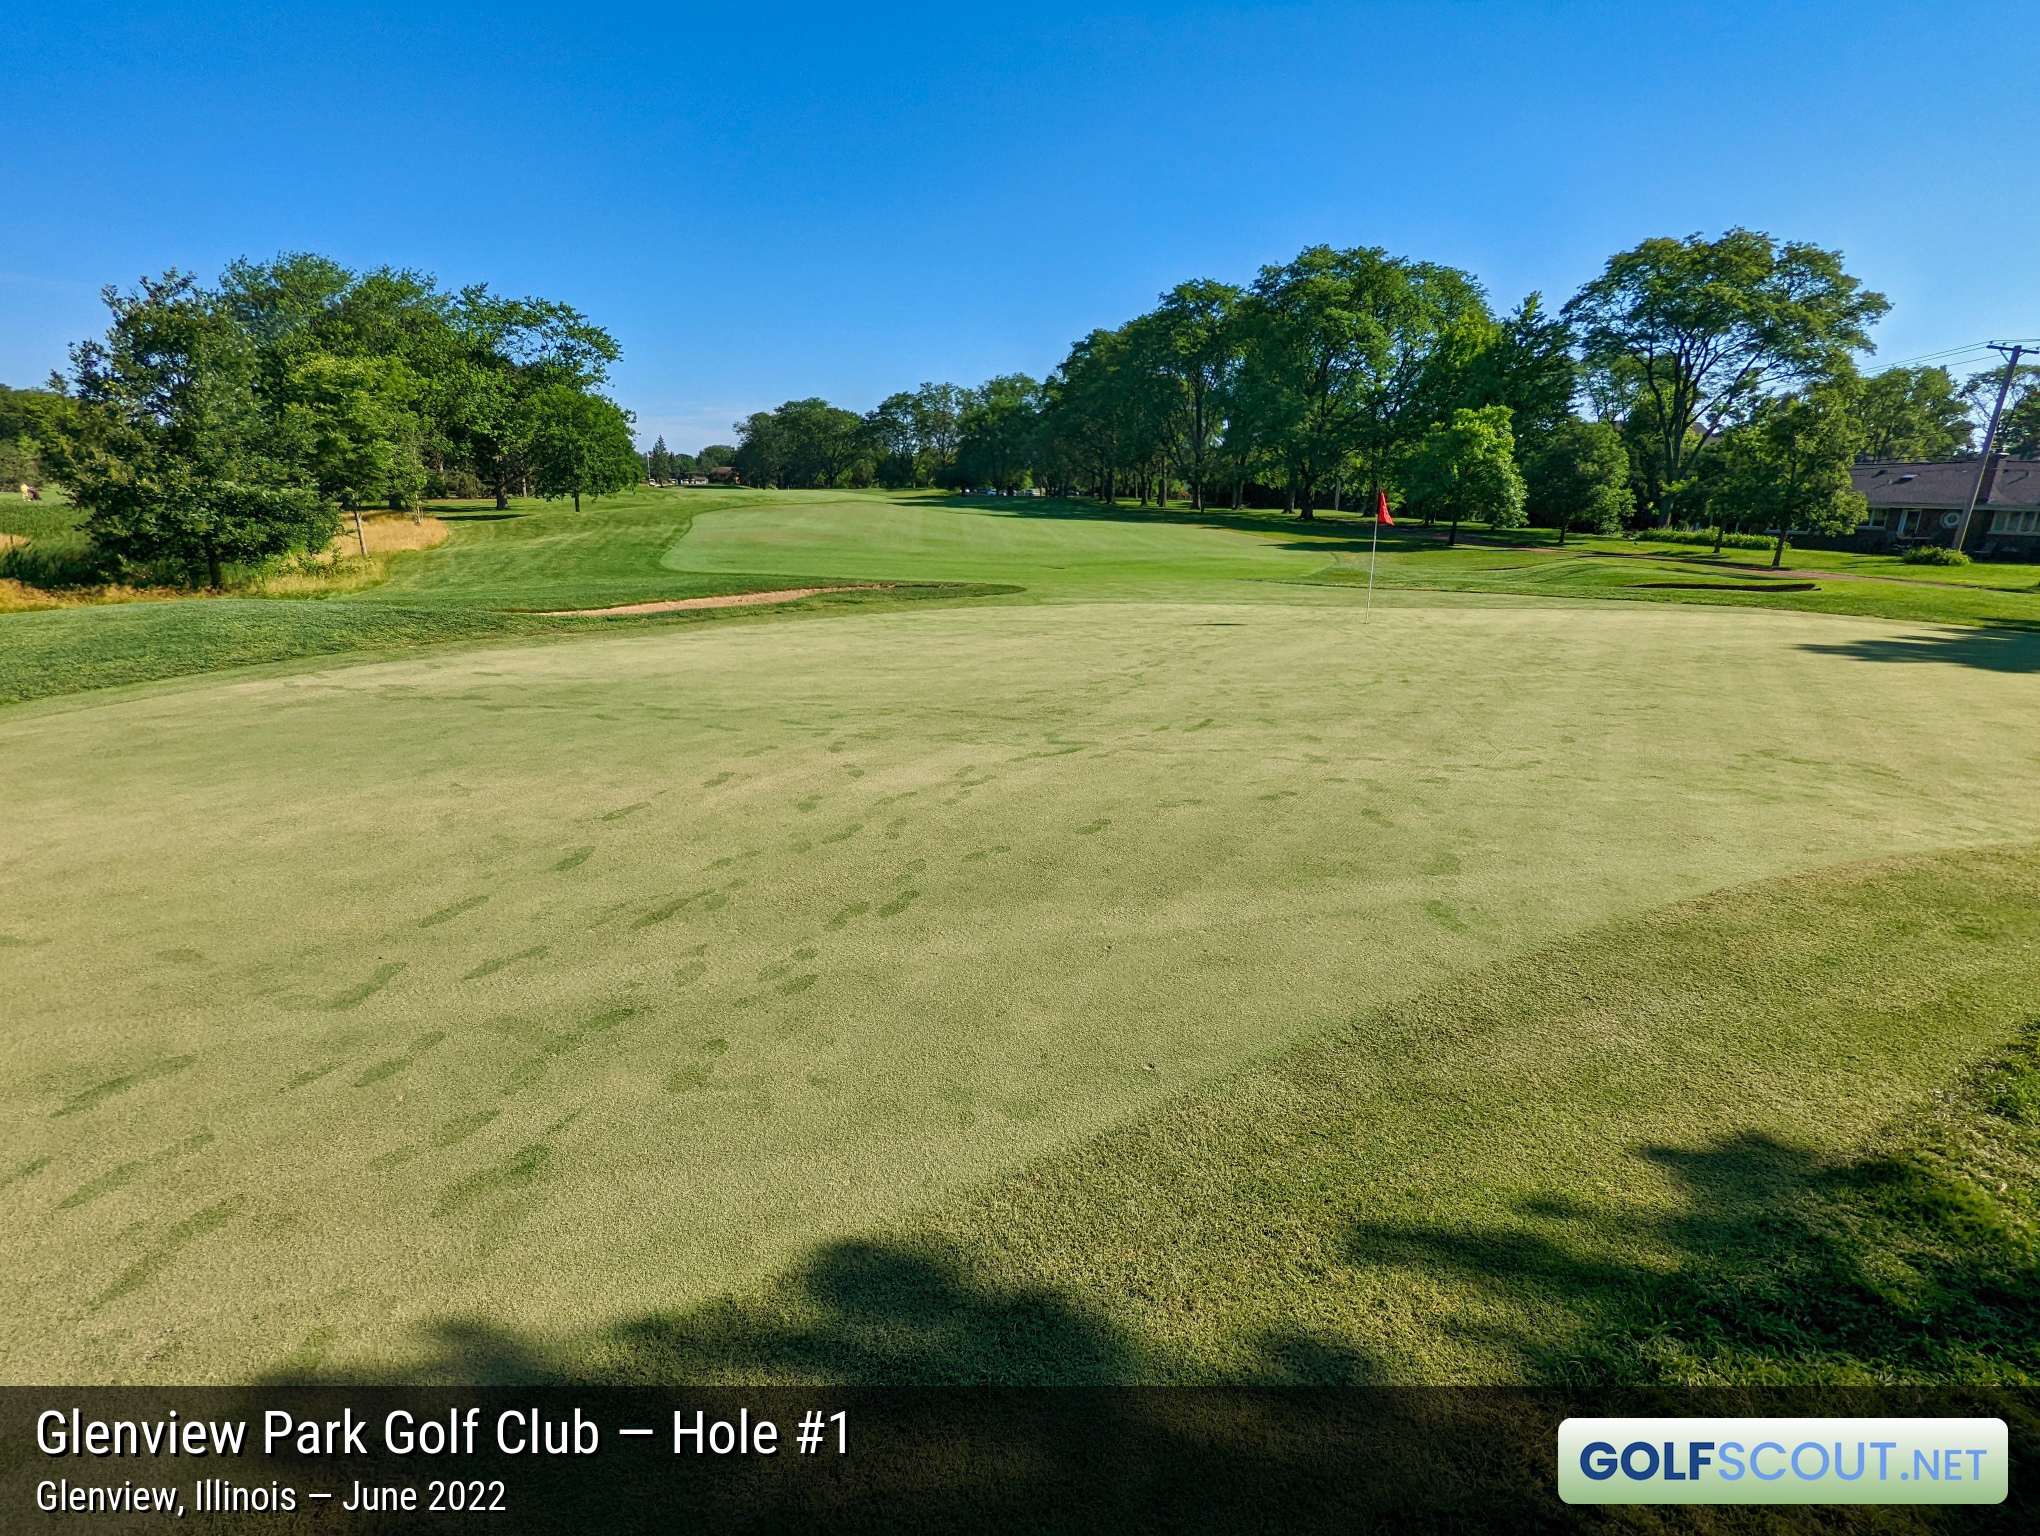 Photo of hole #1 at Glenview Park Golf Club in Glenview, Illinois. 